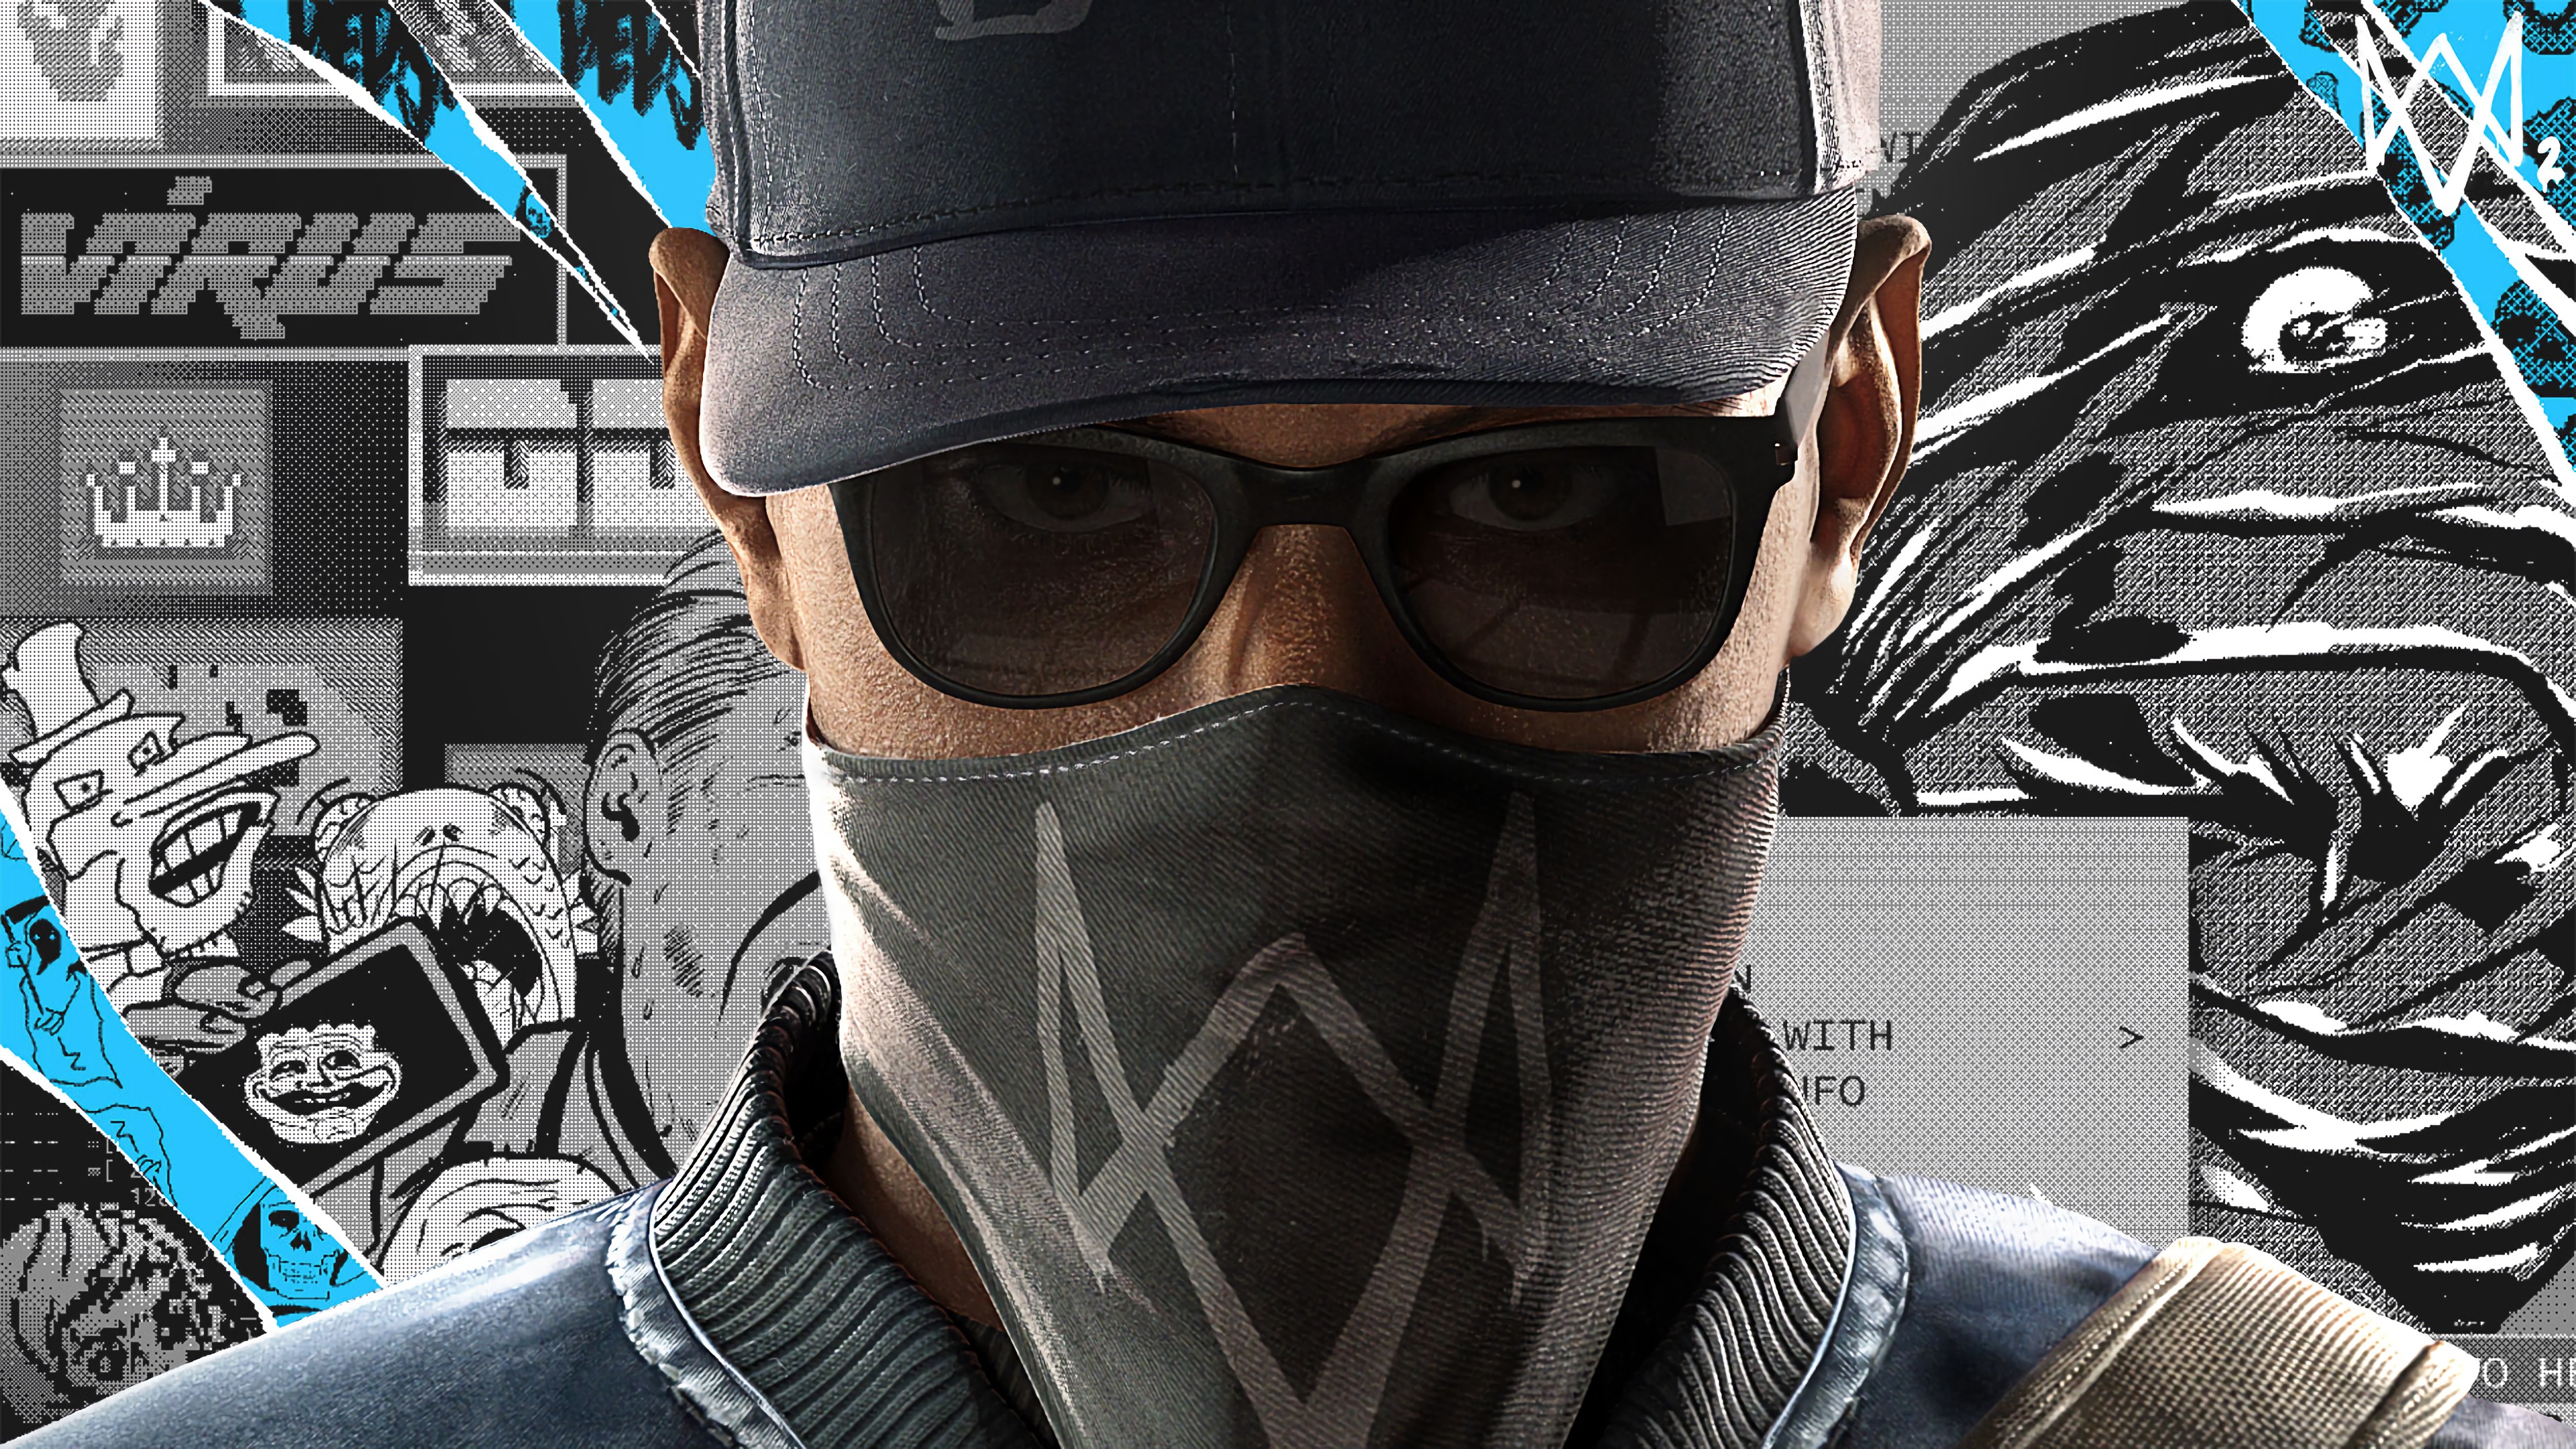 2560x1080 Watch Dogs 2 Marcus Holloway Face 2560x1080 Resolution Wallpaper Hd Games 4k Wallpapers Images Photos And Background Wallpapers Den